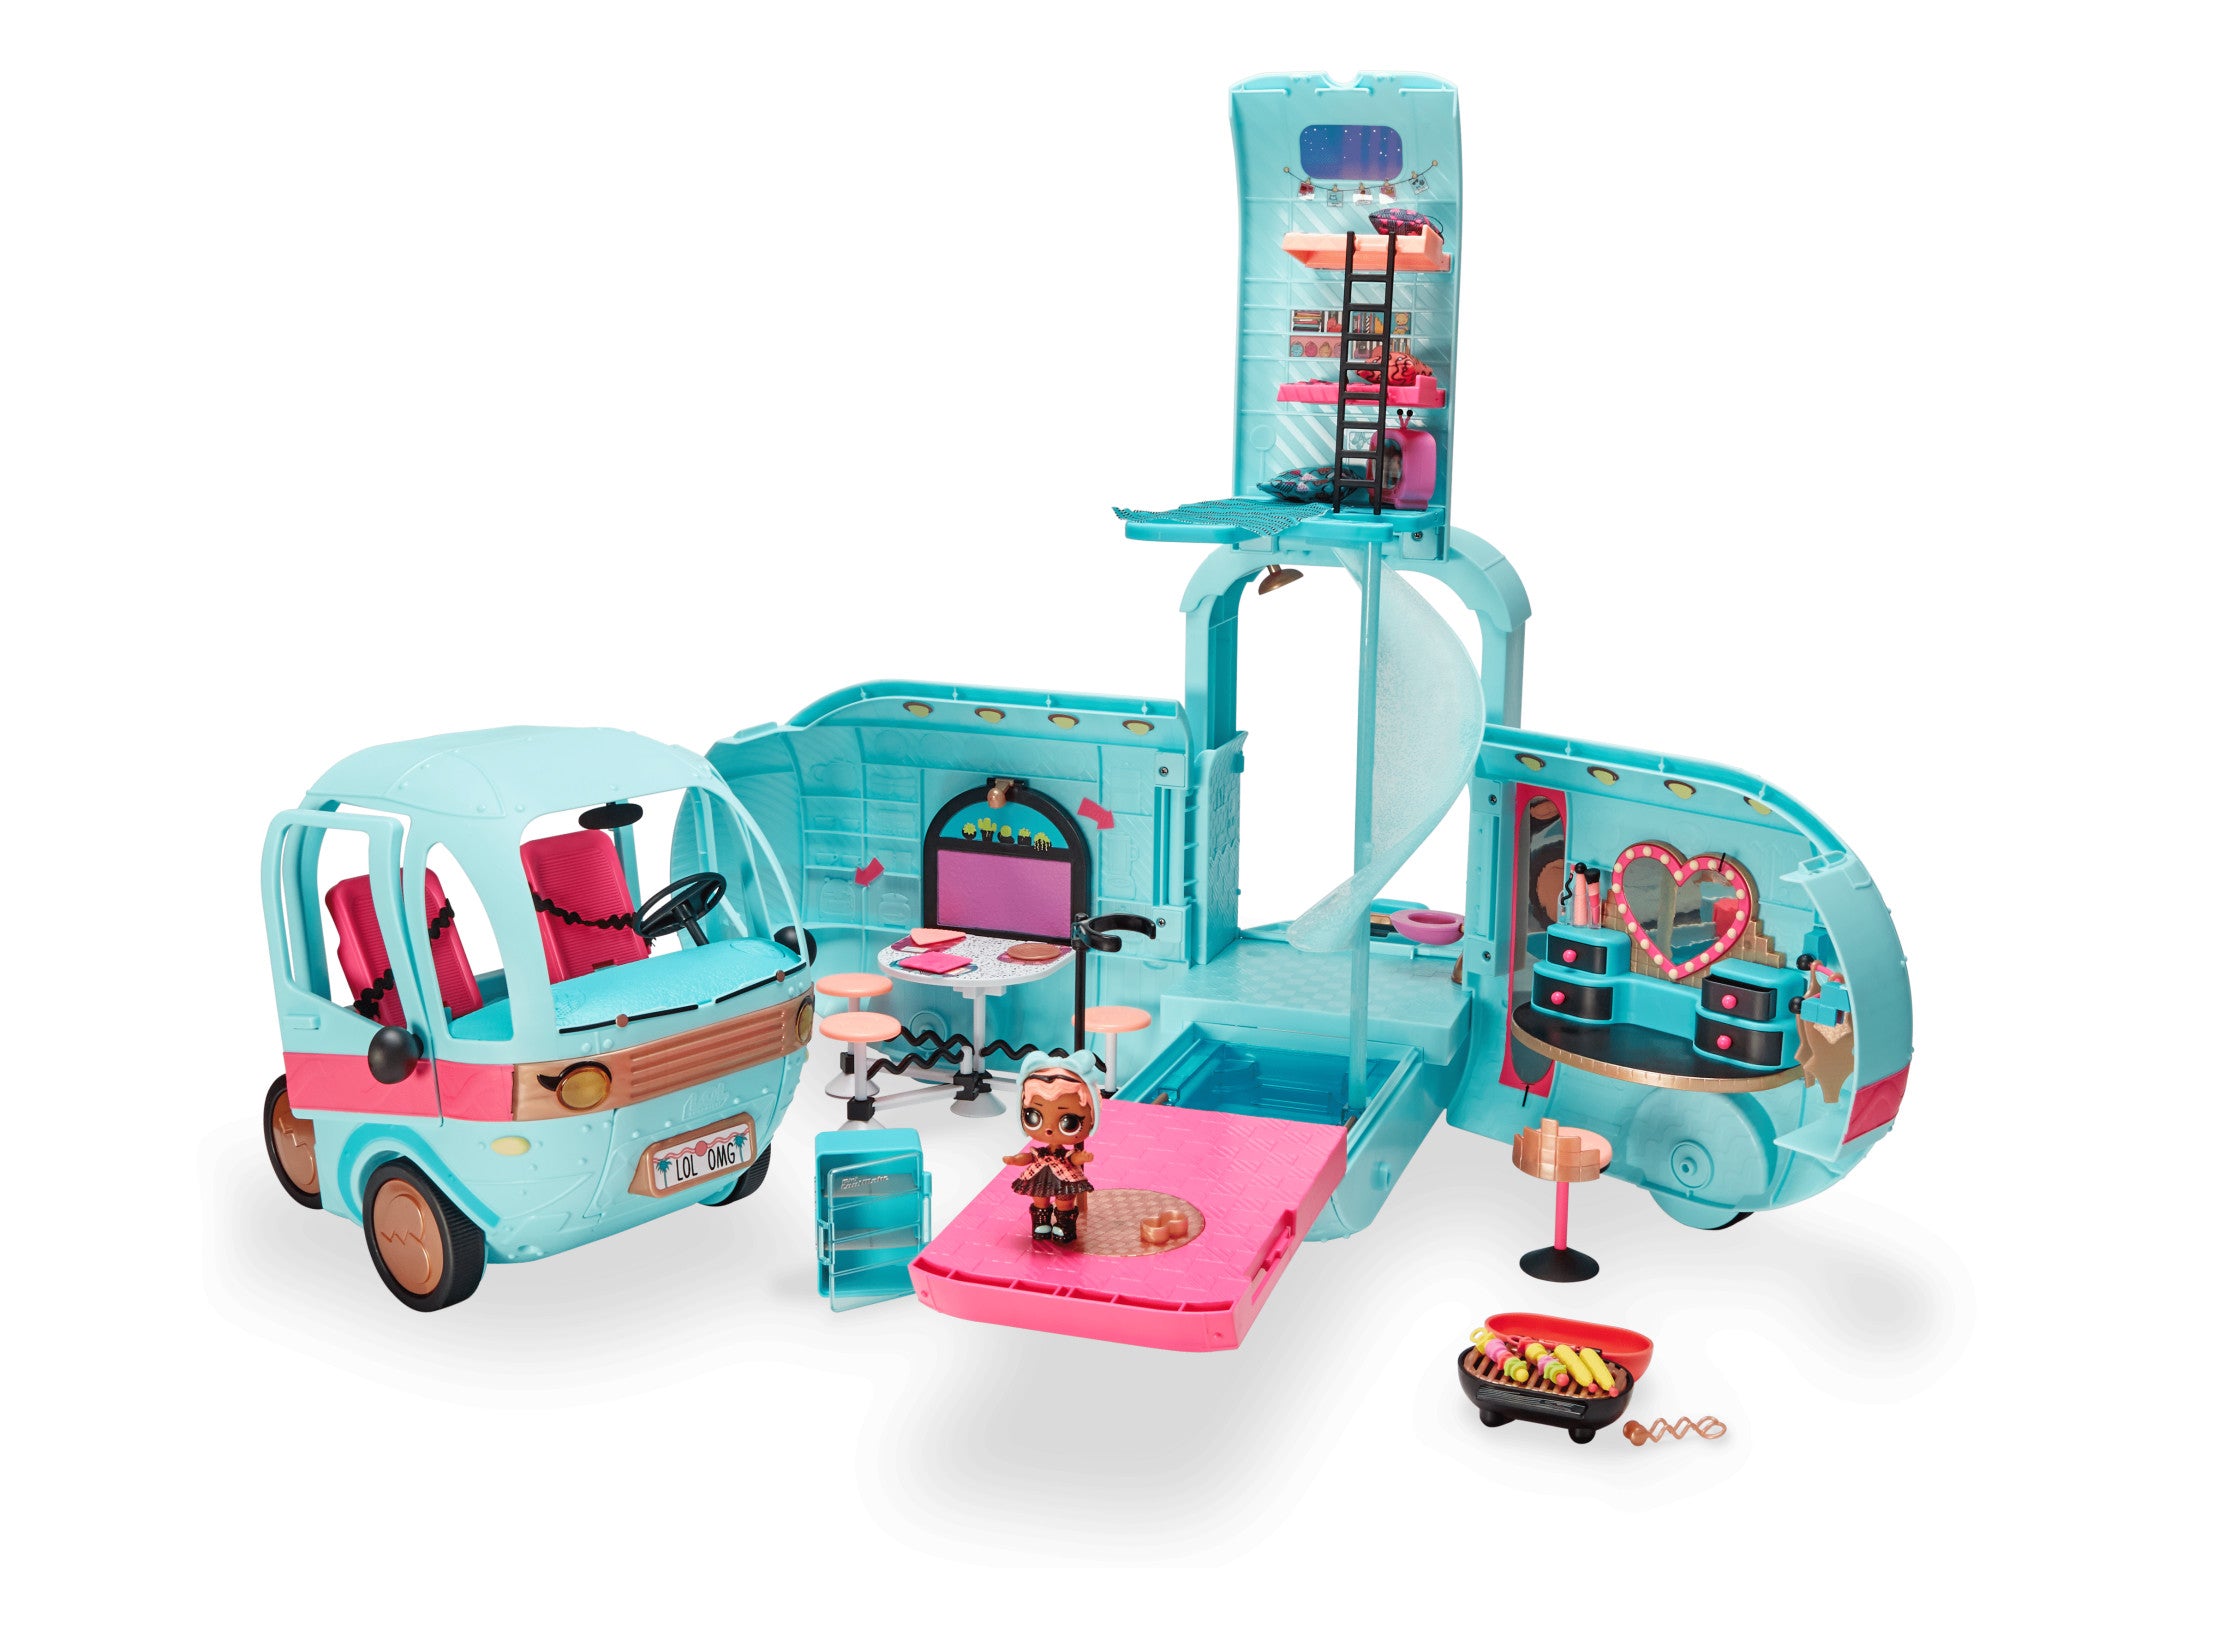 L.O.L. Surprise! 2-in-1 Glamper Fashion Camper from MGA Entertainment 